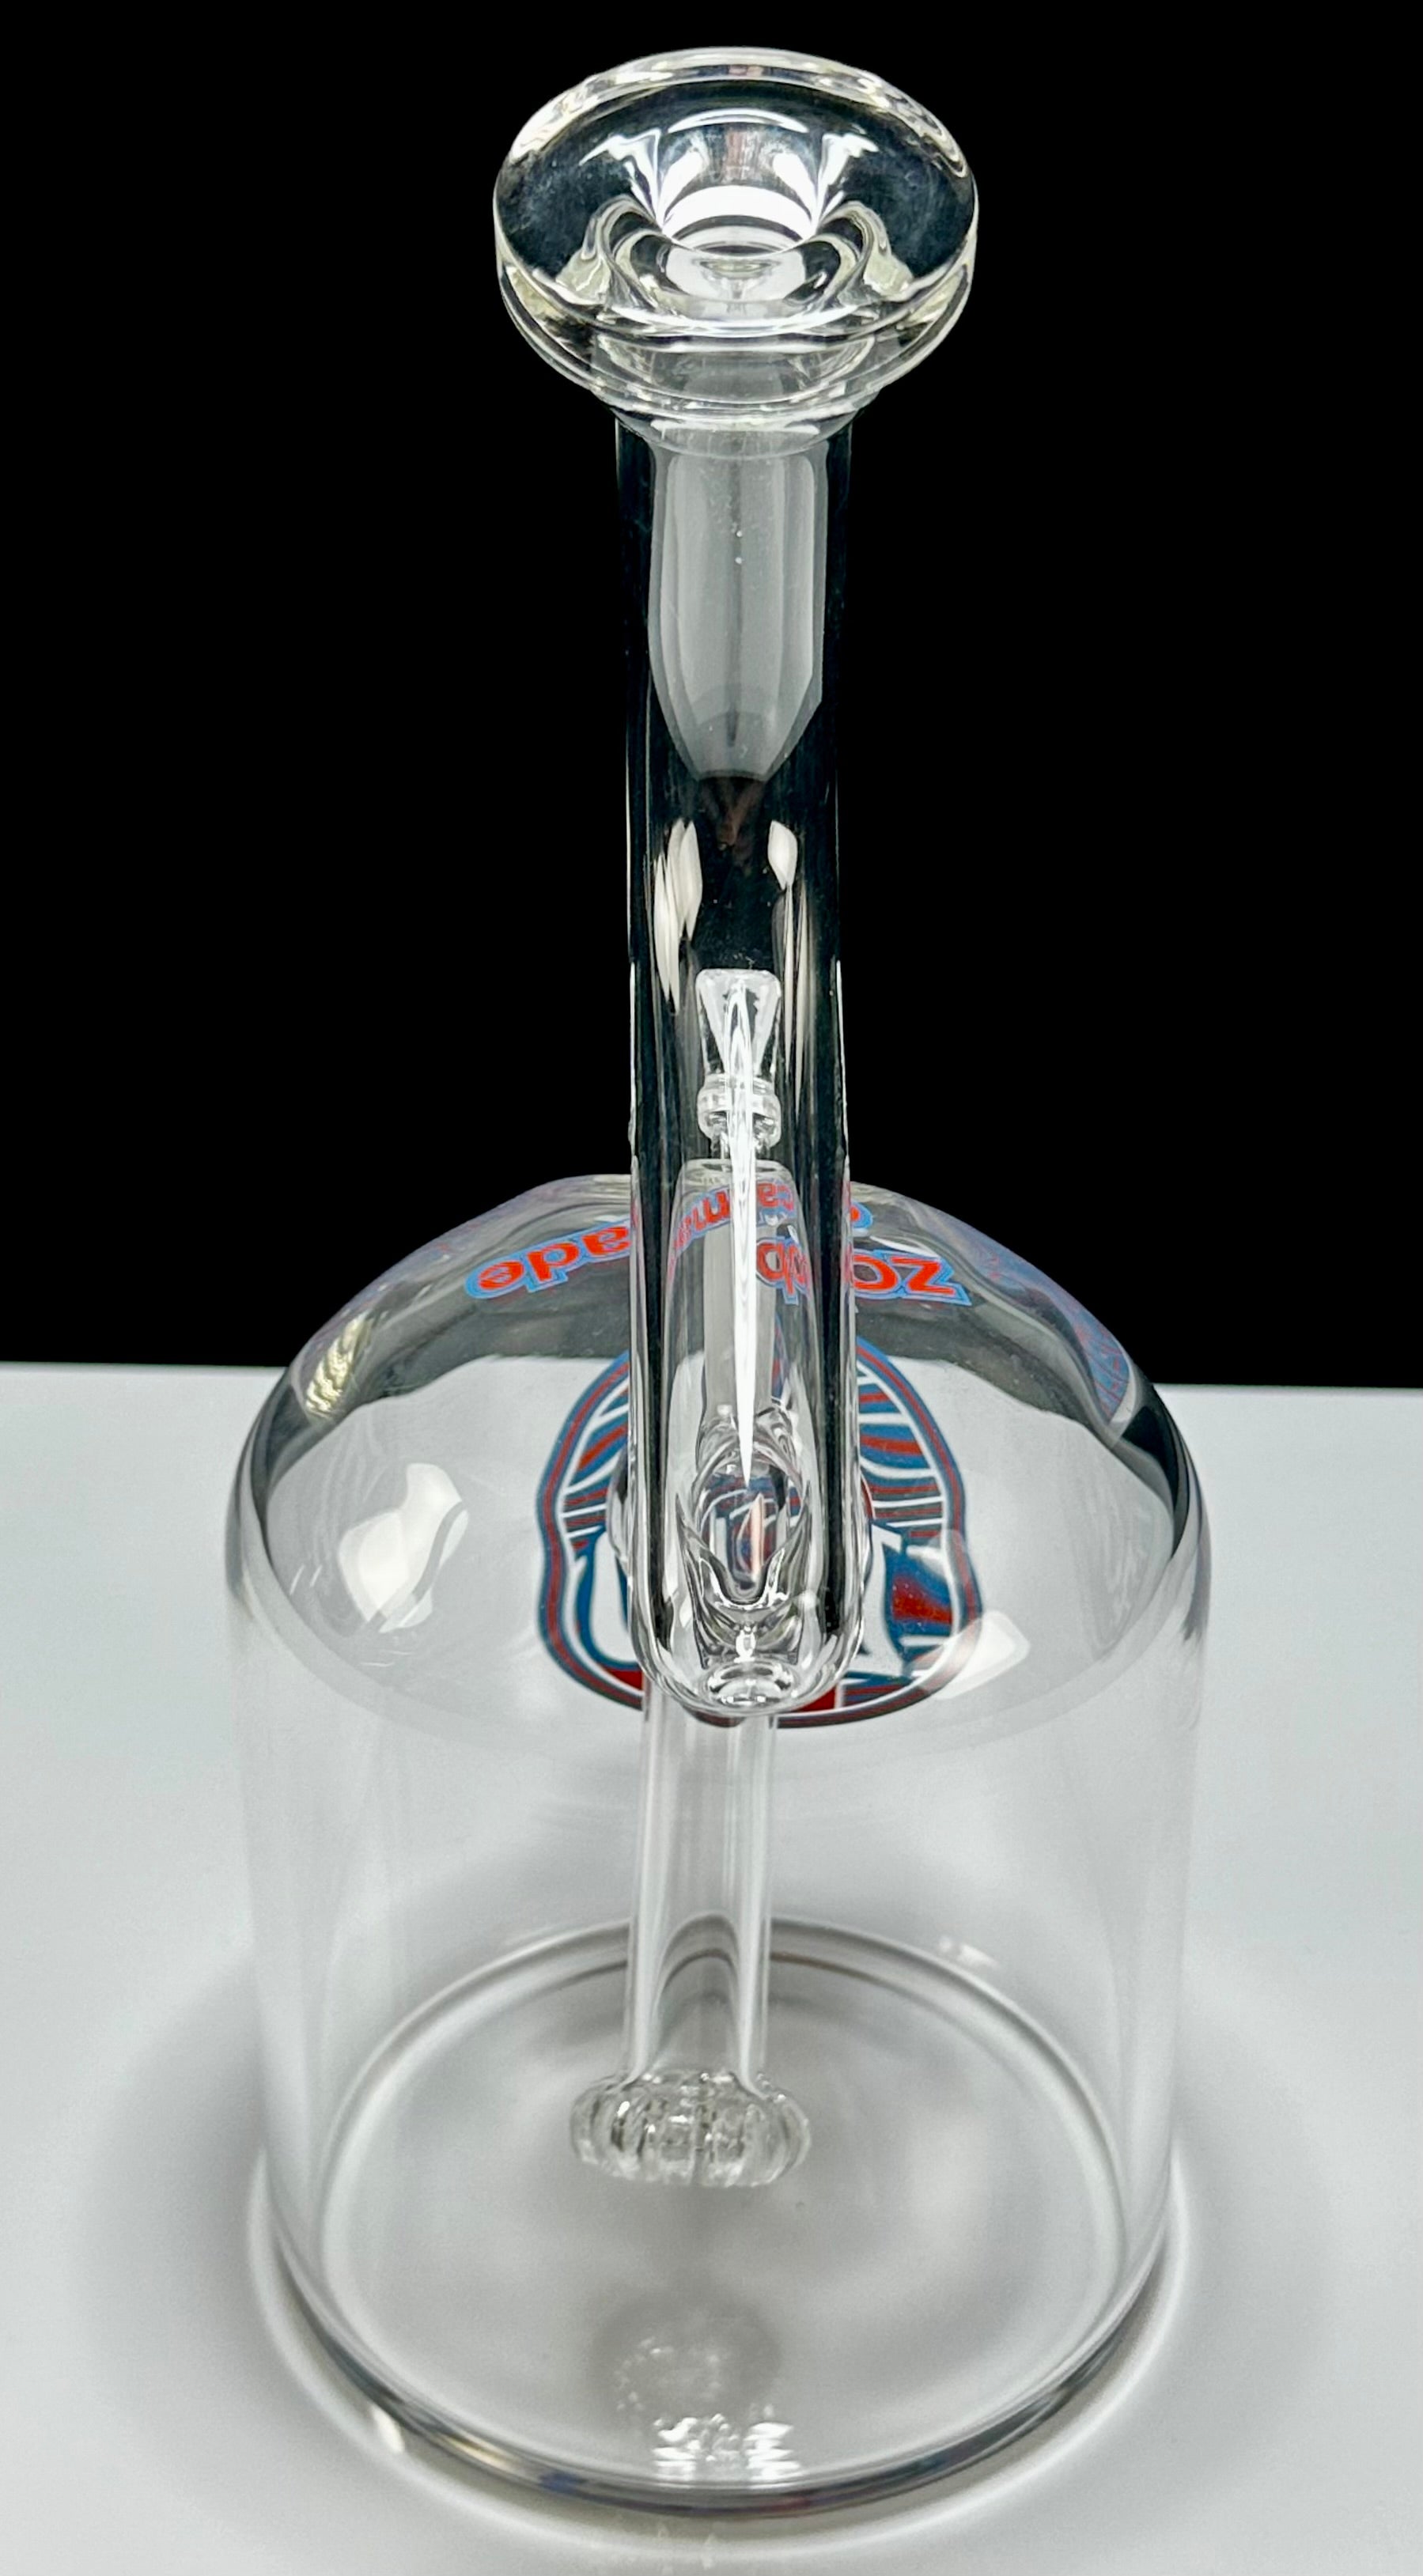 Zob 10.5 inch 110mm Chamber Bubbler with Fixed Flat Disc Diffuser Orange & Blue Label